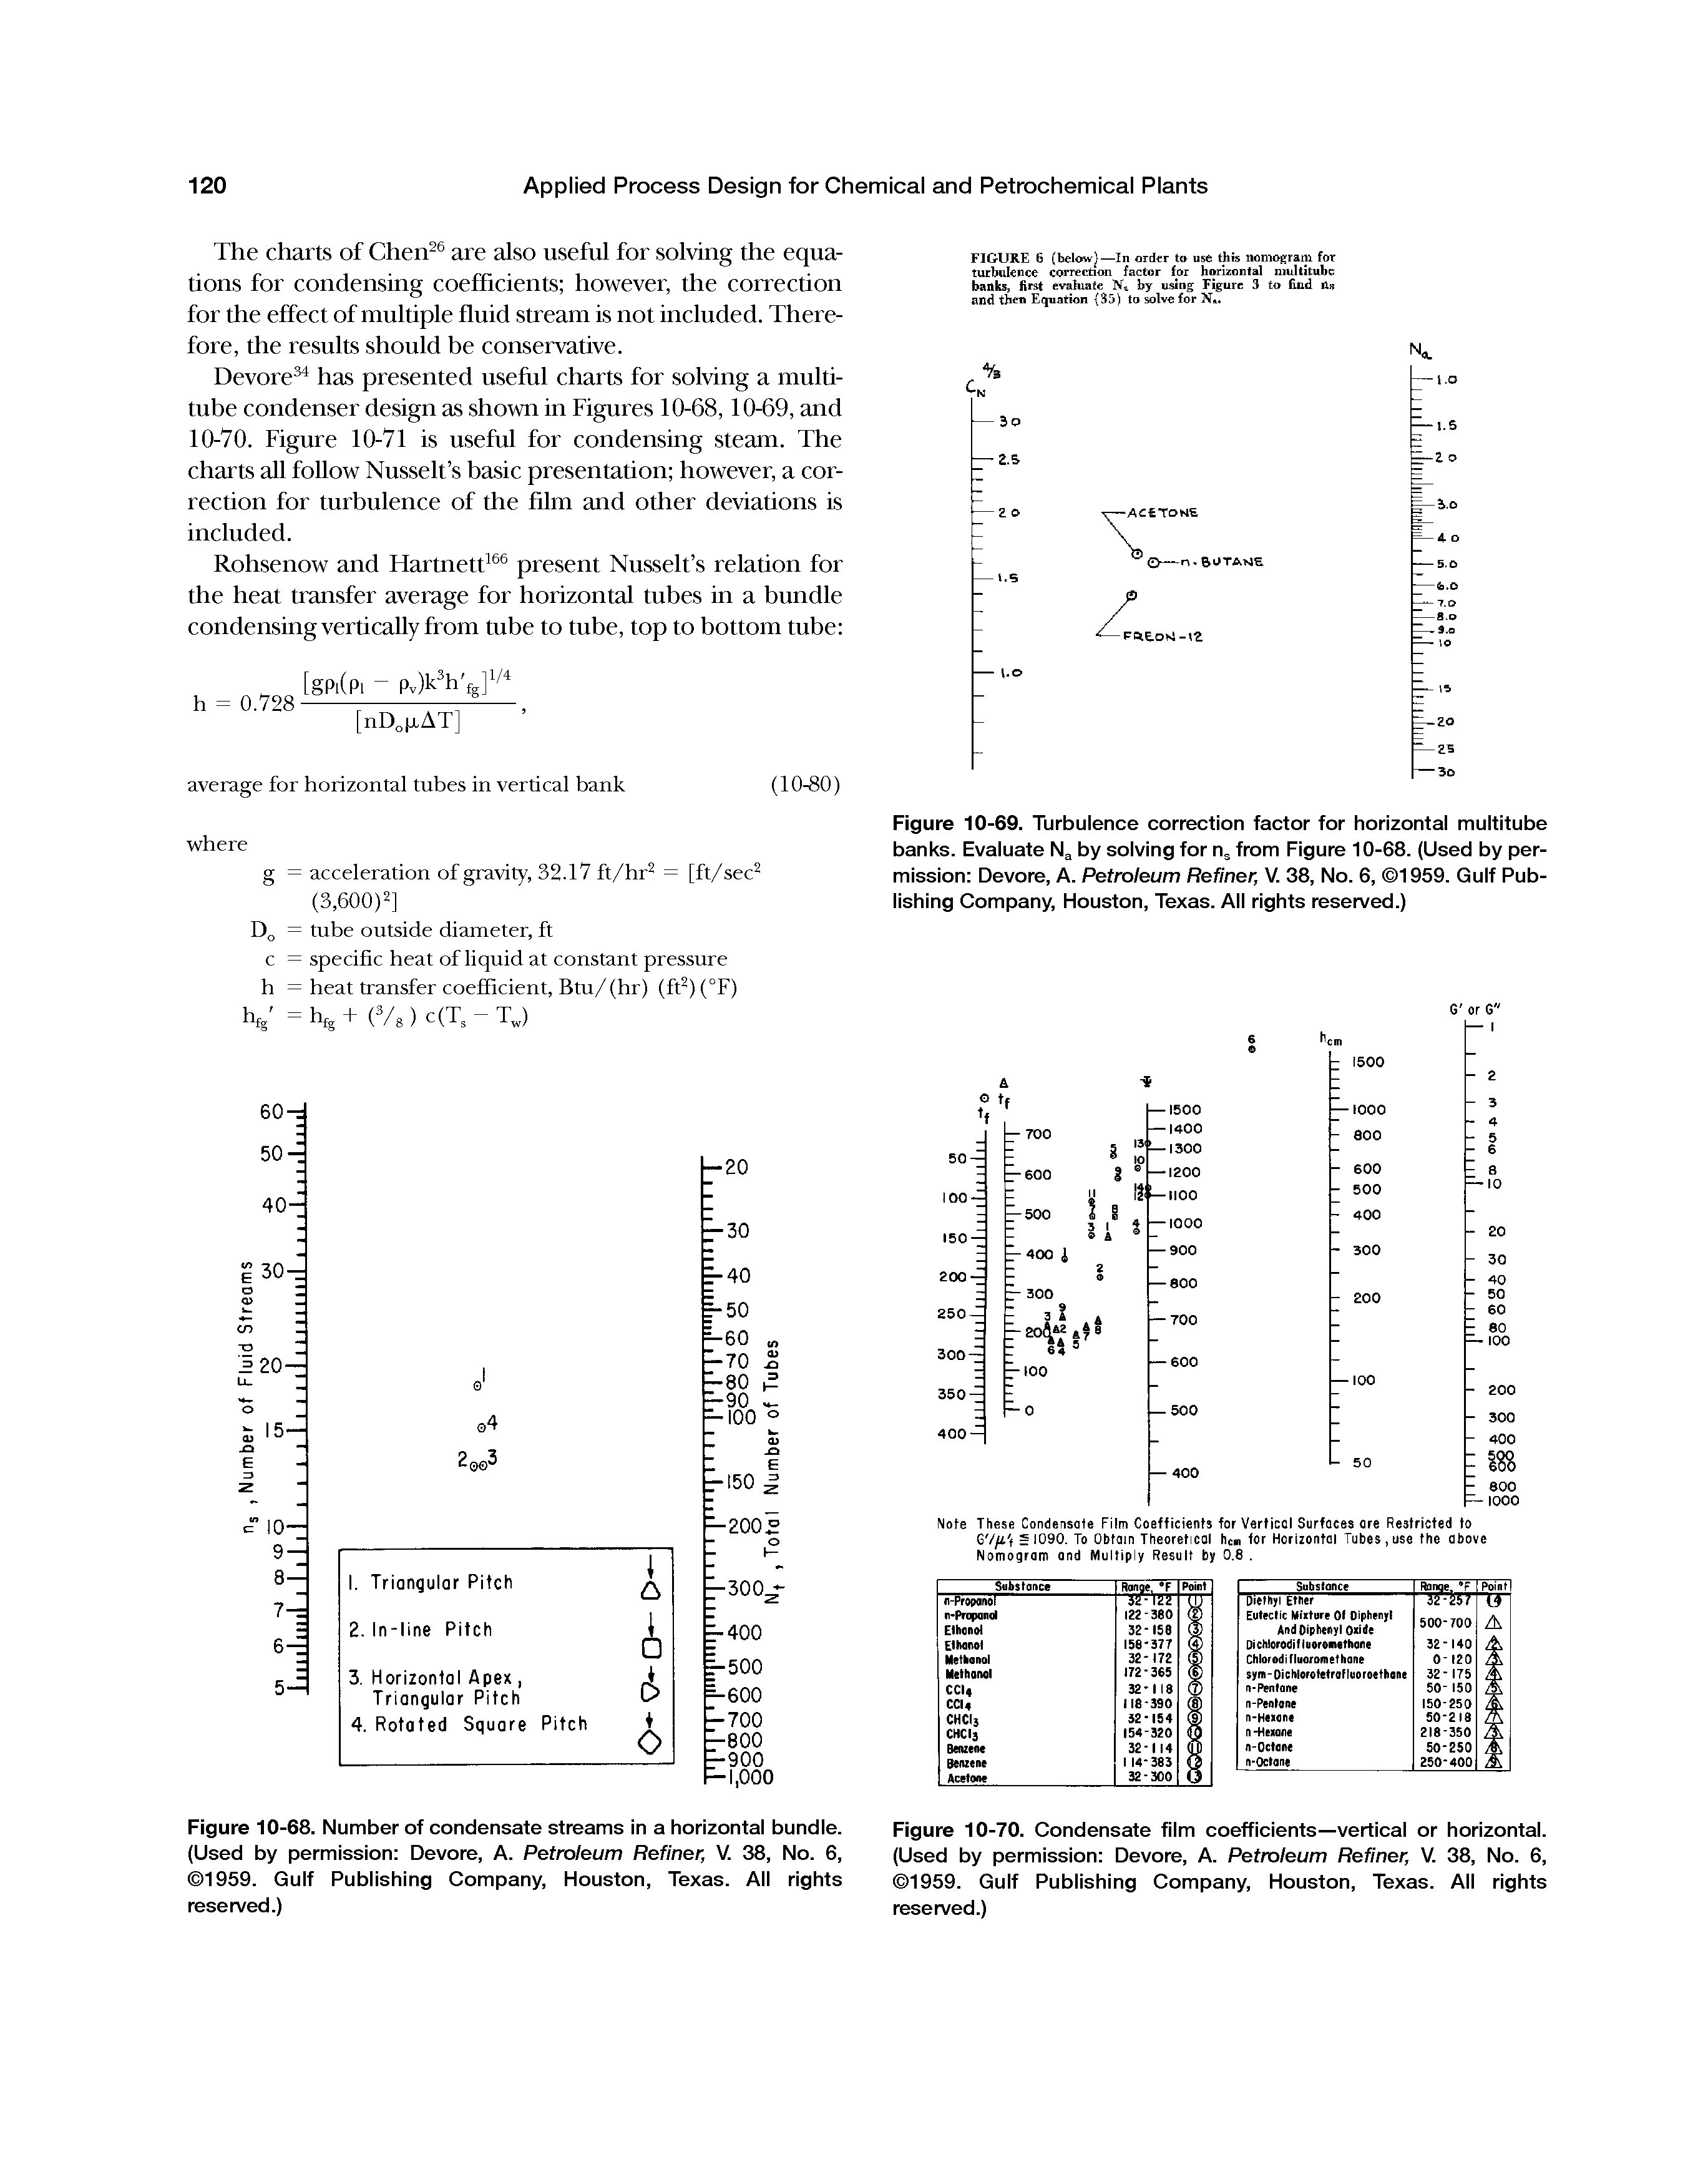 Figure 10-70. Condensate film coefficients—vertical or horizontal. (Used by permission Devore, A. Petroleum Refiner, V. 38, No. 6, 1959. Gulf Publishing Company, Houston, Texas. All rights reserved.)...